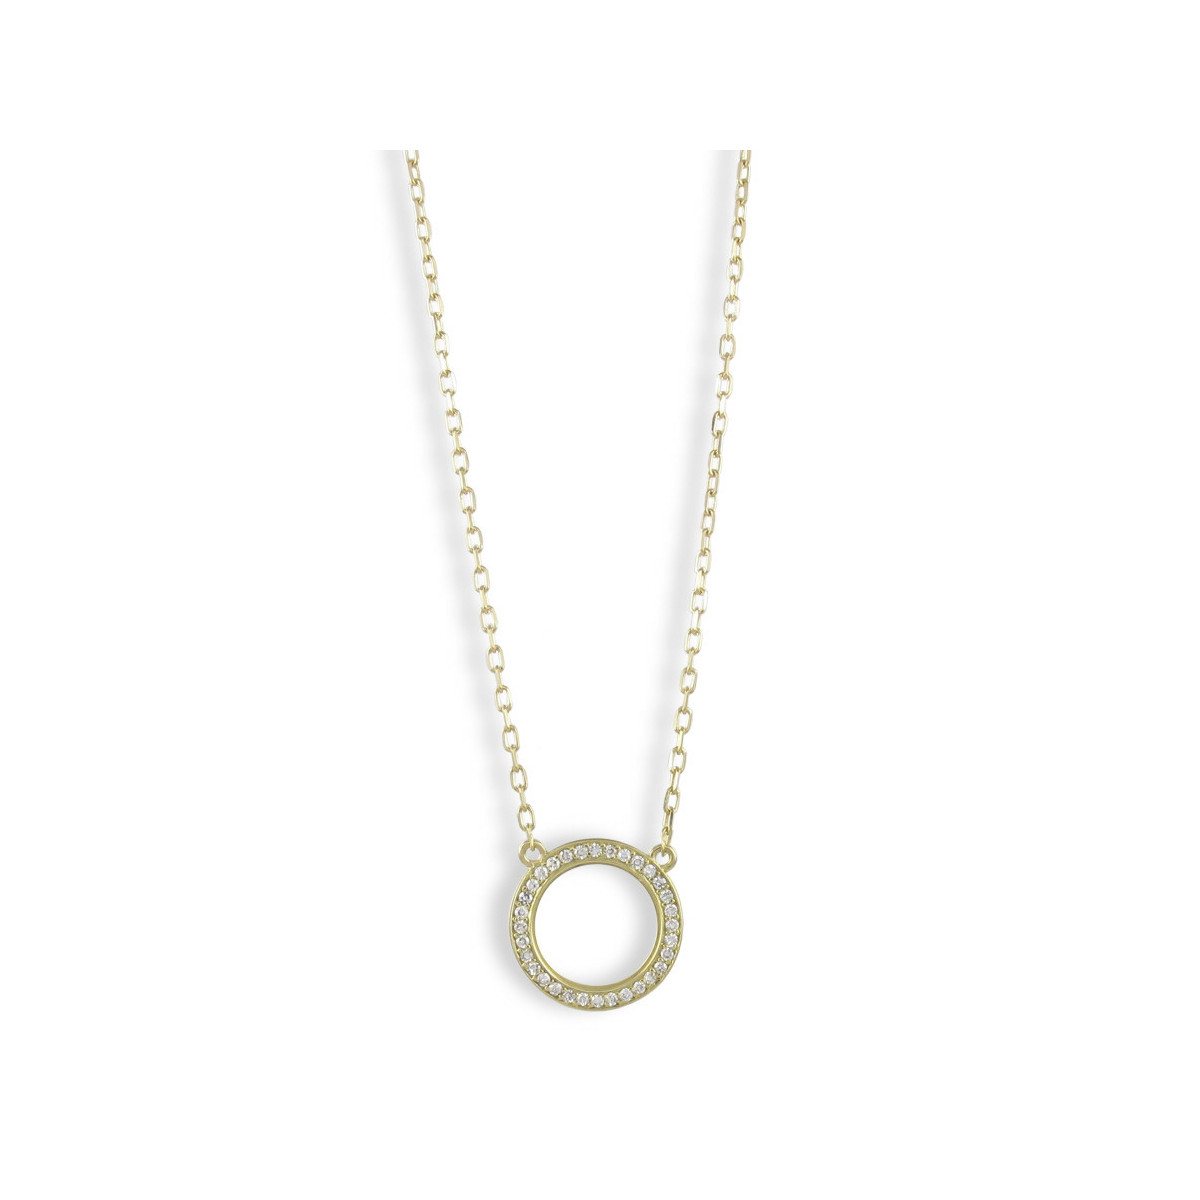 40 CM YELLOW GOLD NECKLACE WITH DIAMONDS